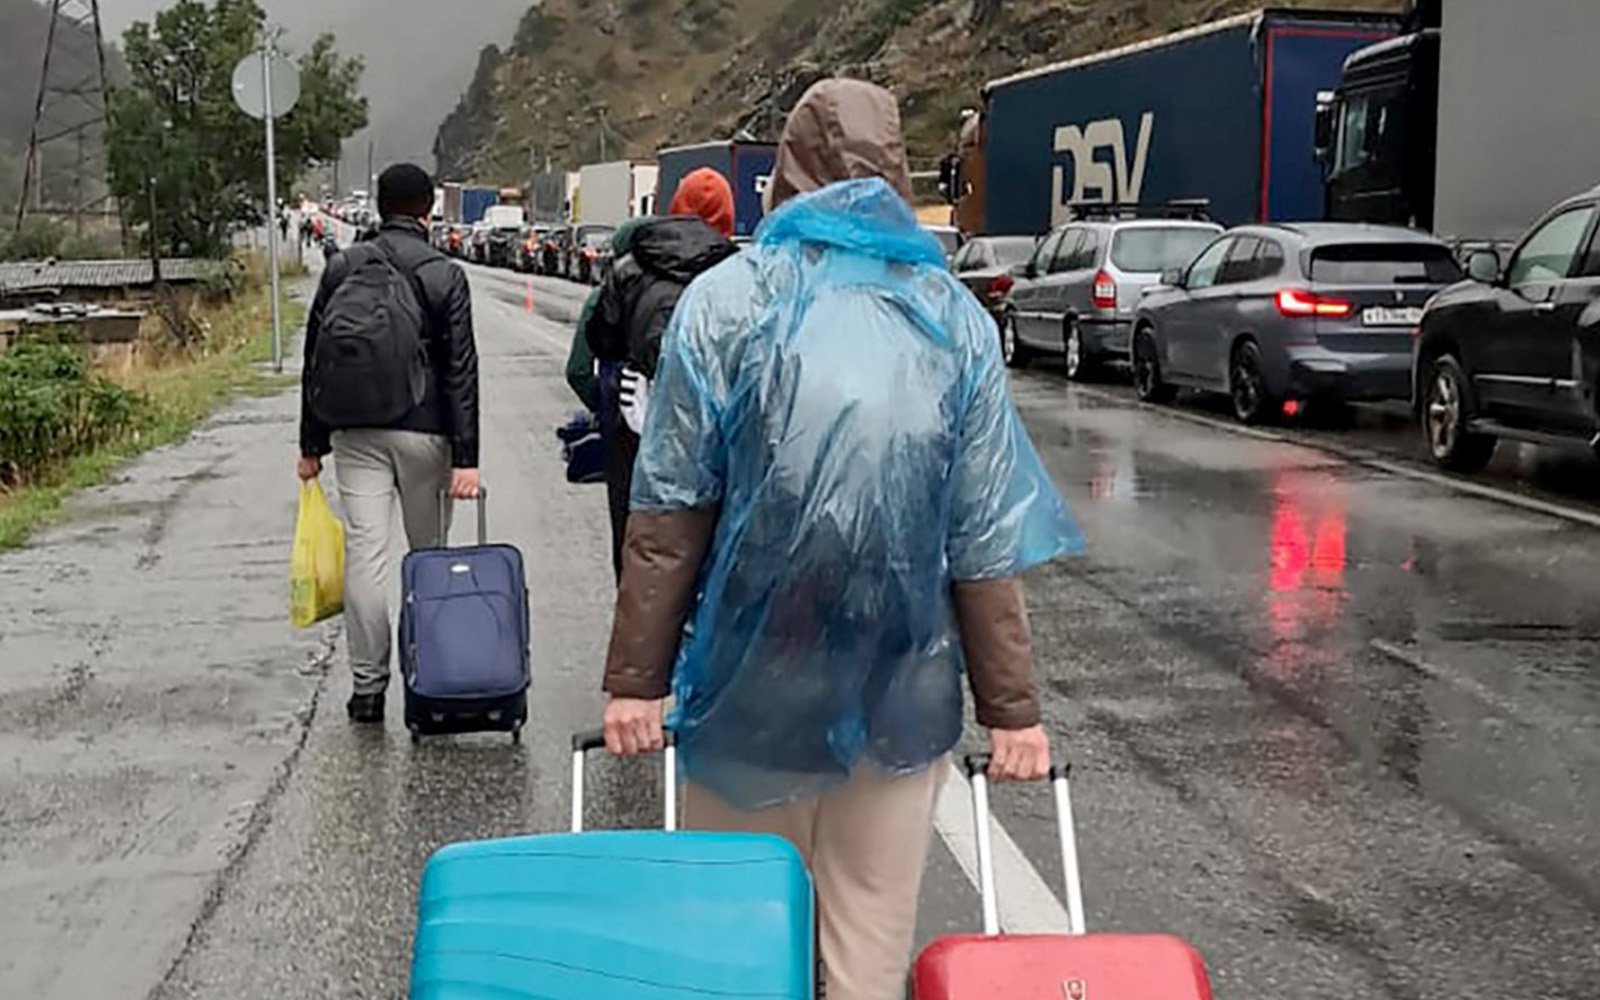 People carrying luggage walk past vehicles with Russian license plates on the Russian side of the border toward the Nizhniy Lars customs checkpoint between Georgia and Russia near the town of Vladikavkaz, on September 25, 2022. (AFP)